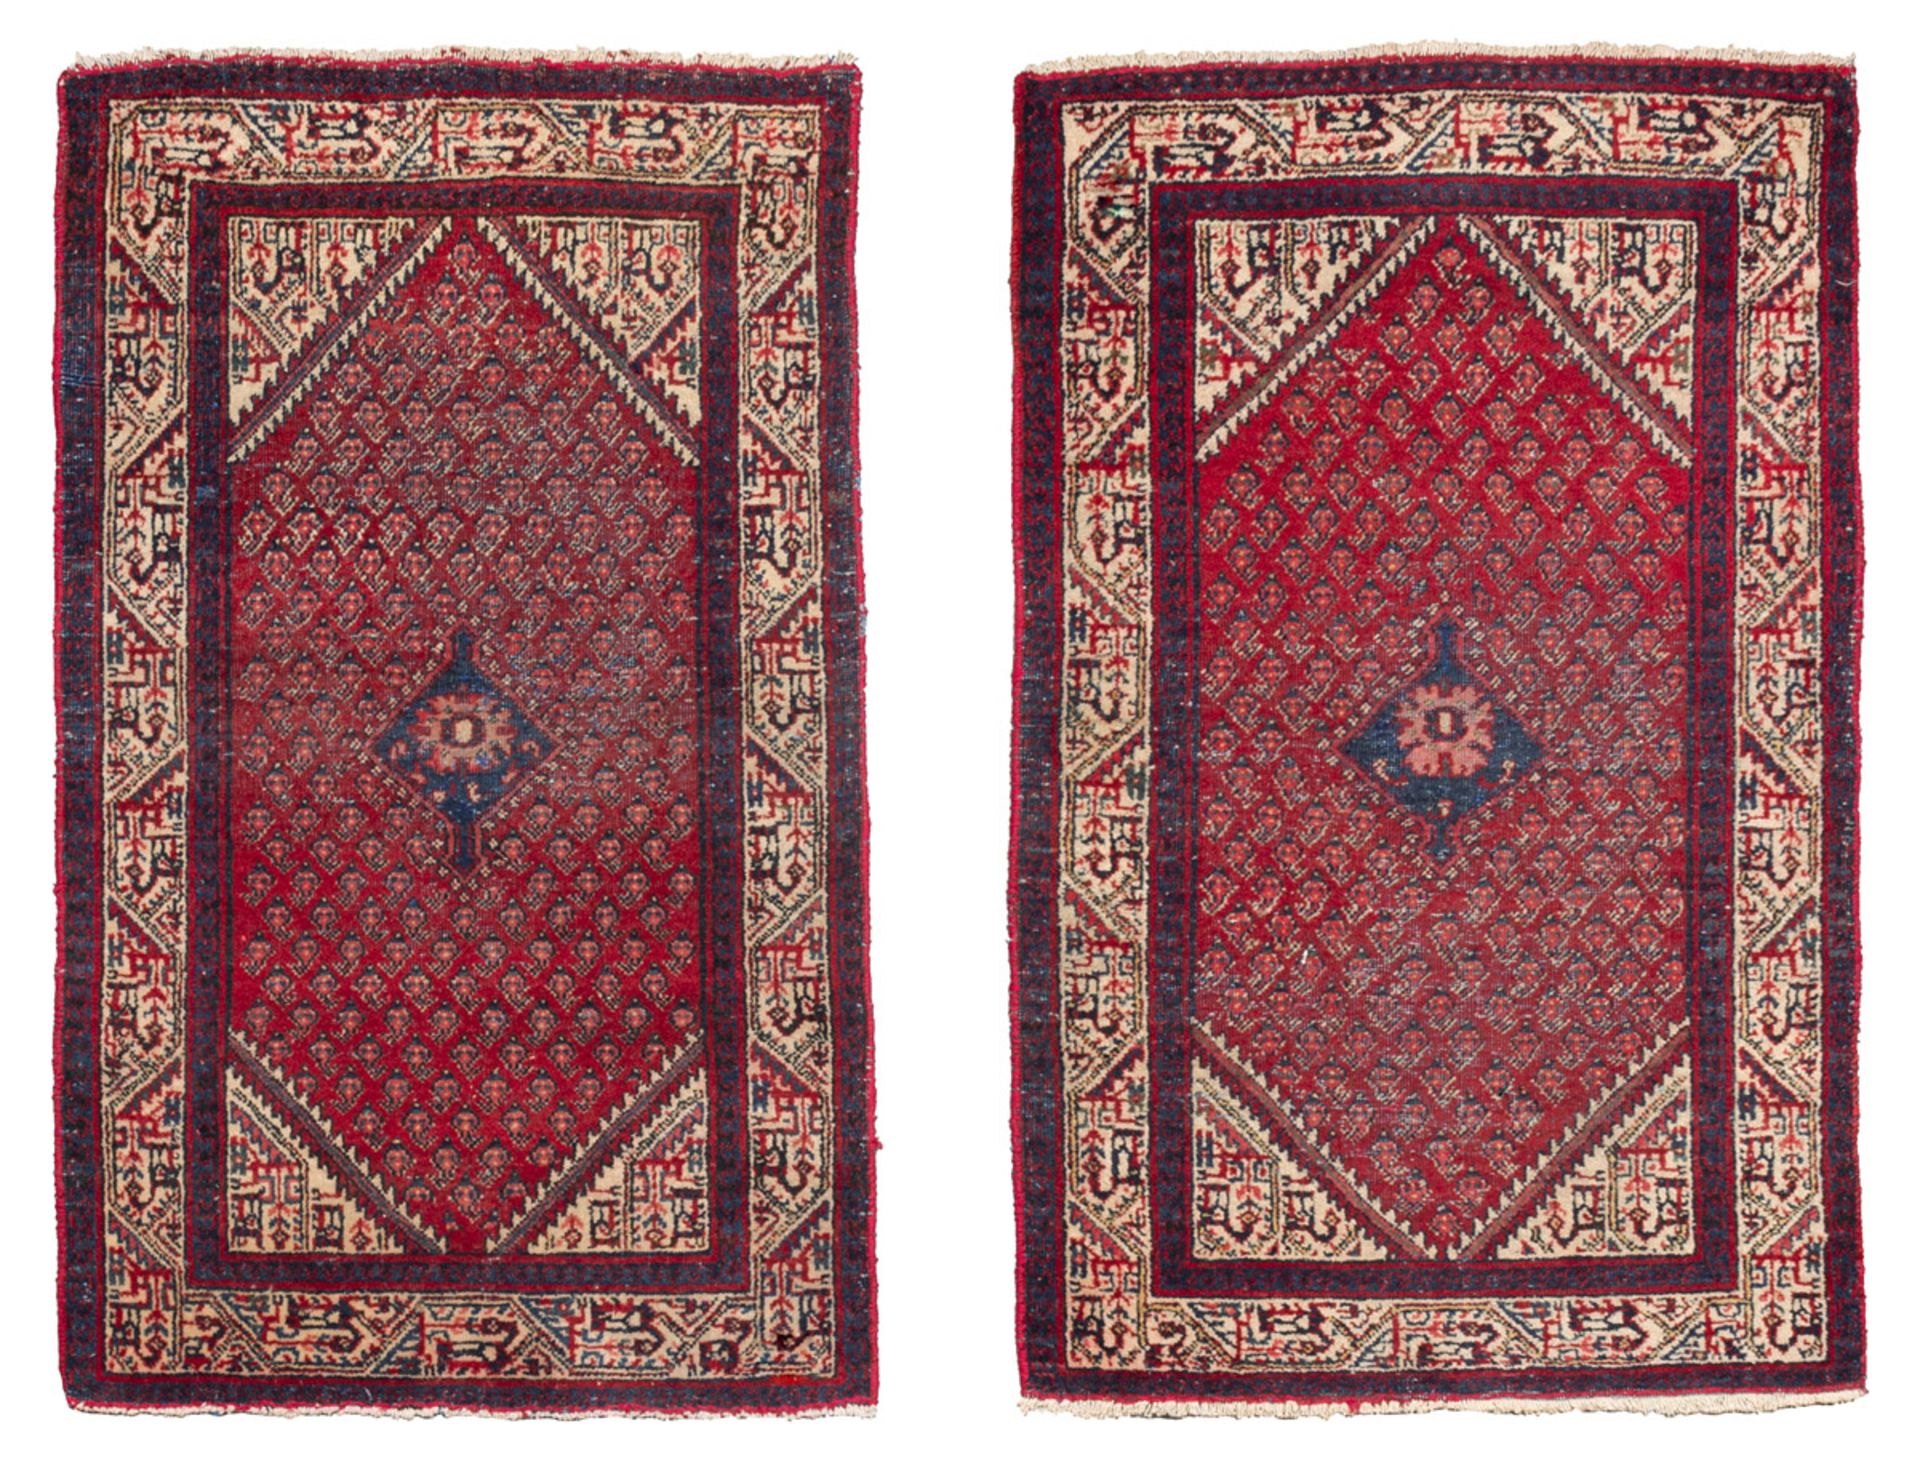 A PAIR OF HAMADAN BED RUGS, EARLY 20TH CENTURY with boteh design n the center field on red ground.